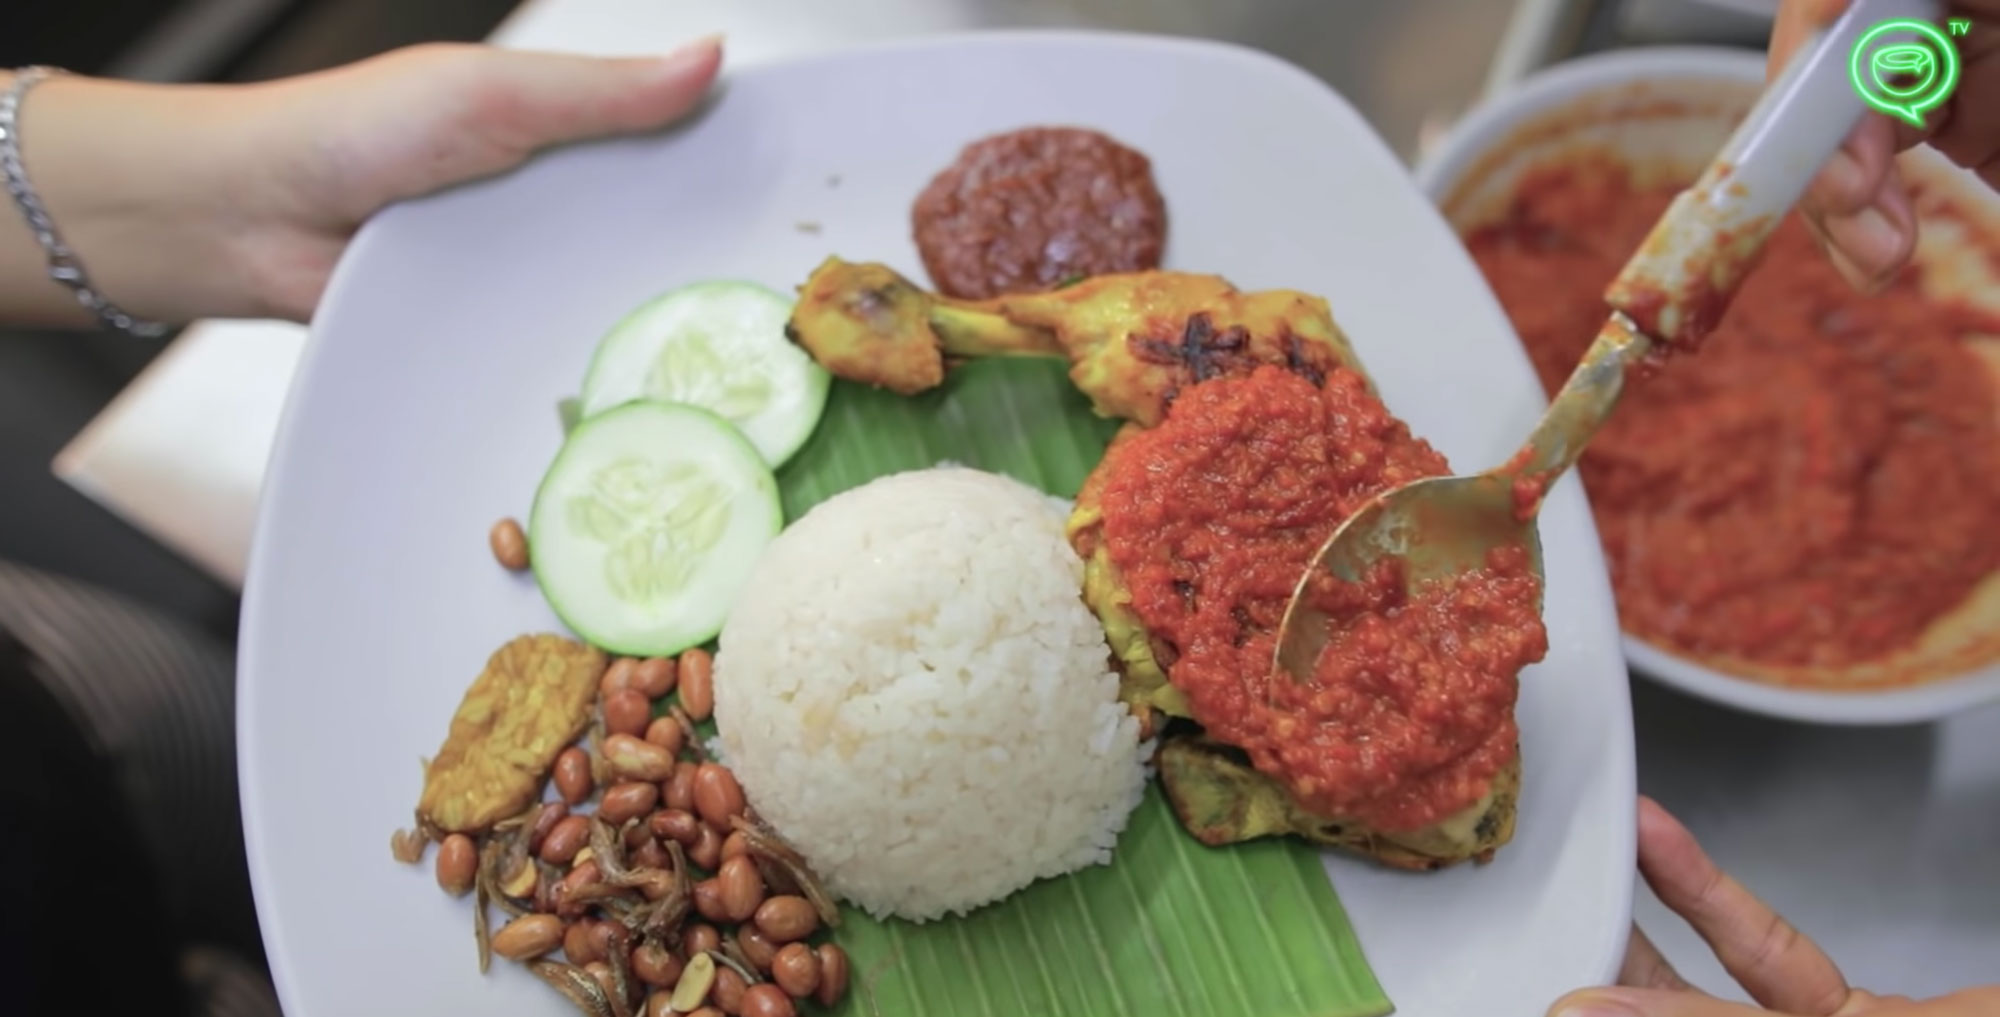 Nasi Lemak should really be enjoyed like this, y’all